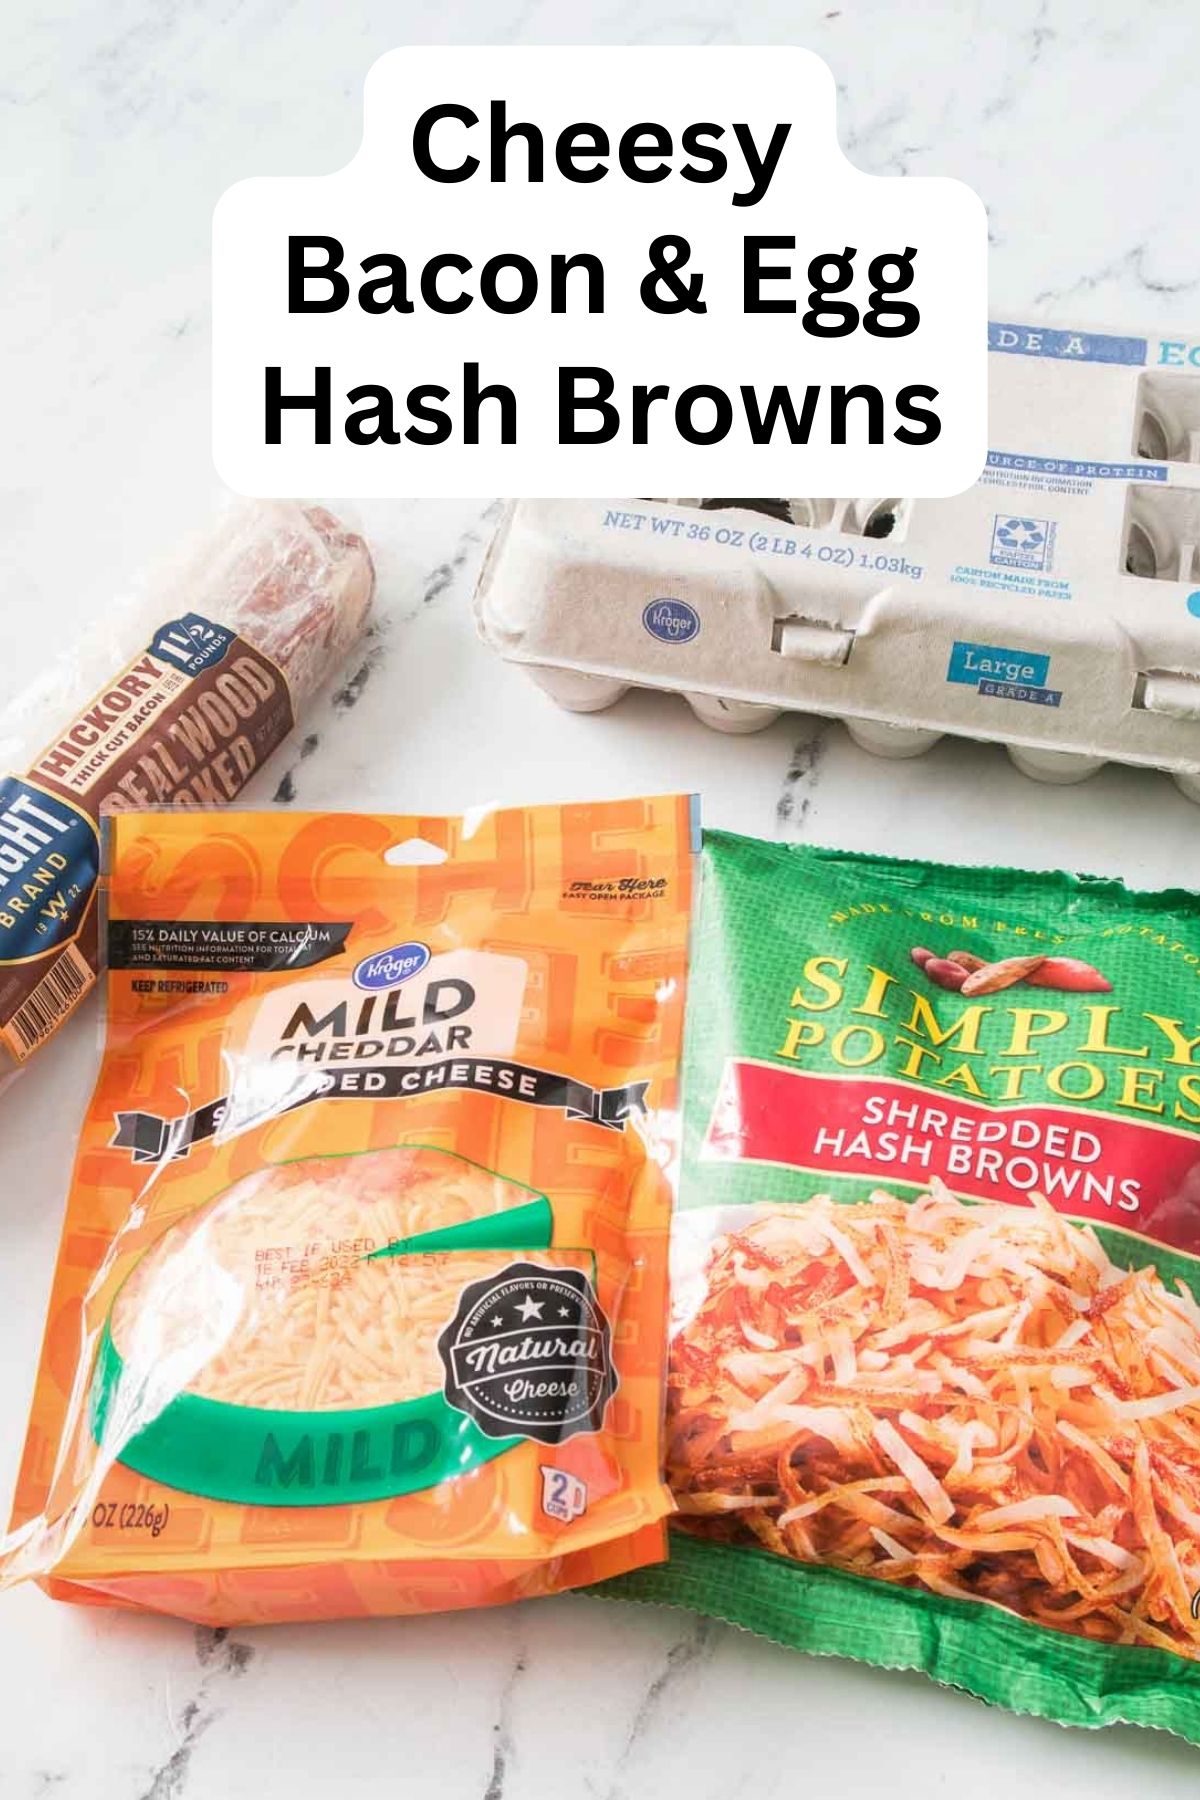 Ingredients to make cheesy bacon and egg hash browns